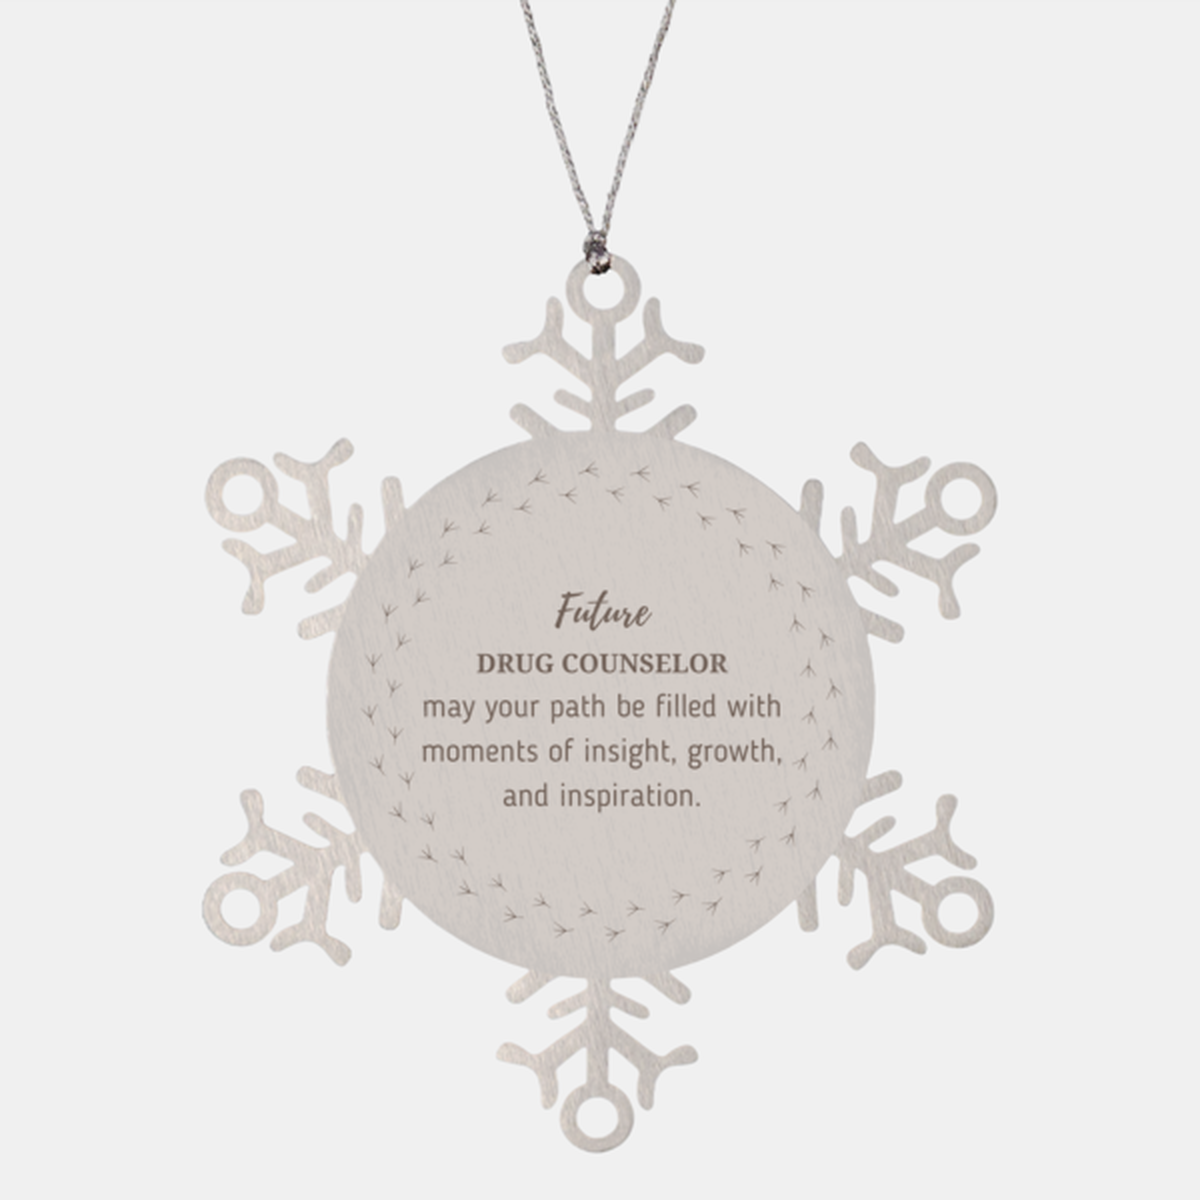 Future Drug Counselor Gifts, May your path be filled with moments of insight, Graduation Gifts for New Drug Counselor, Christmas Unique Snowflake Ornament For Men, Women, Friends